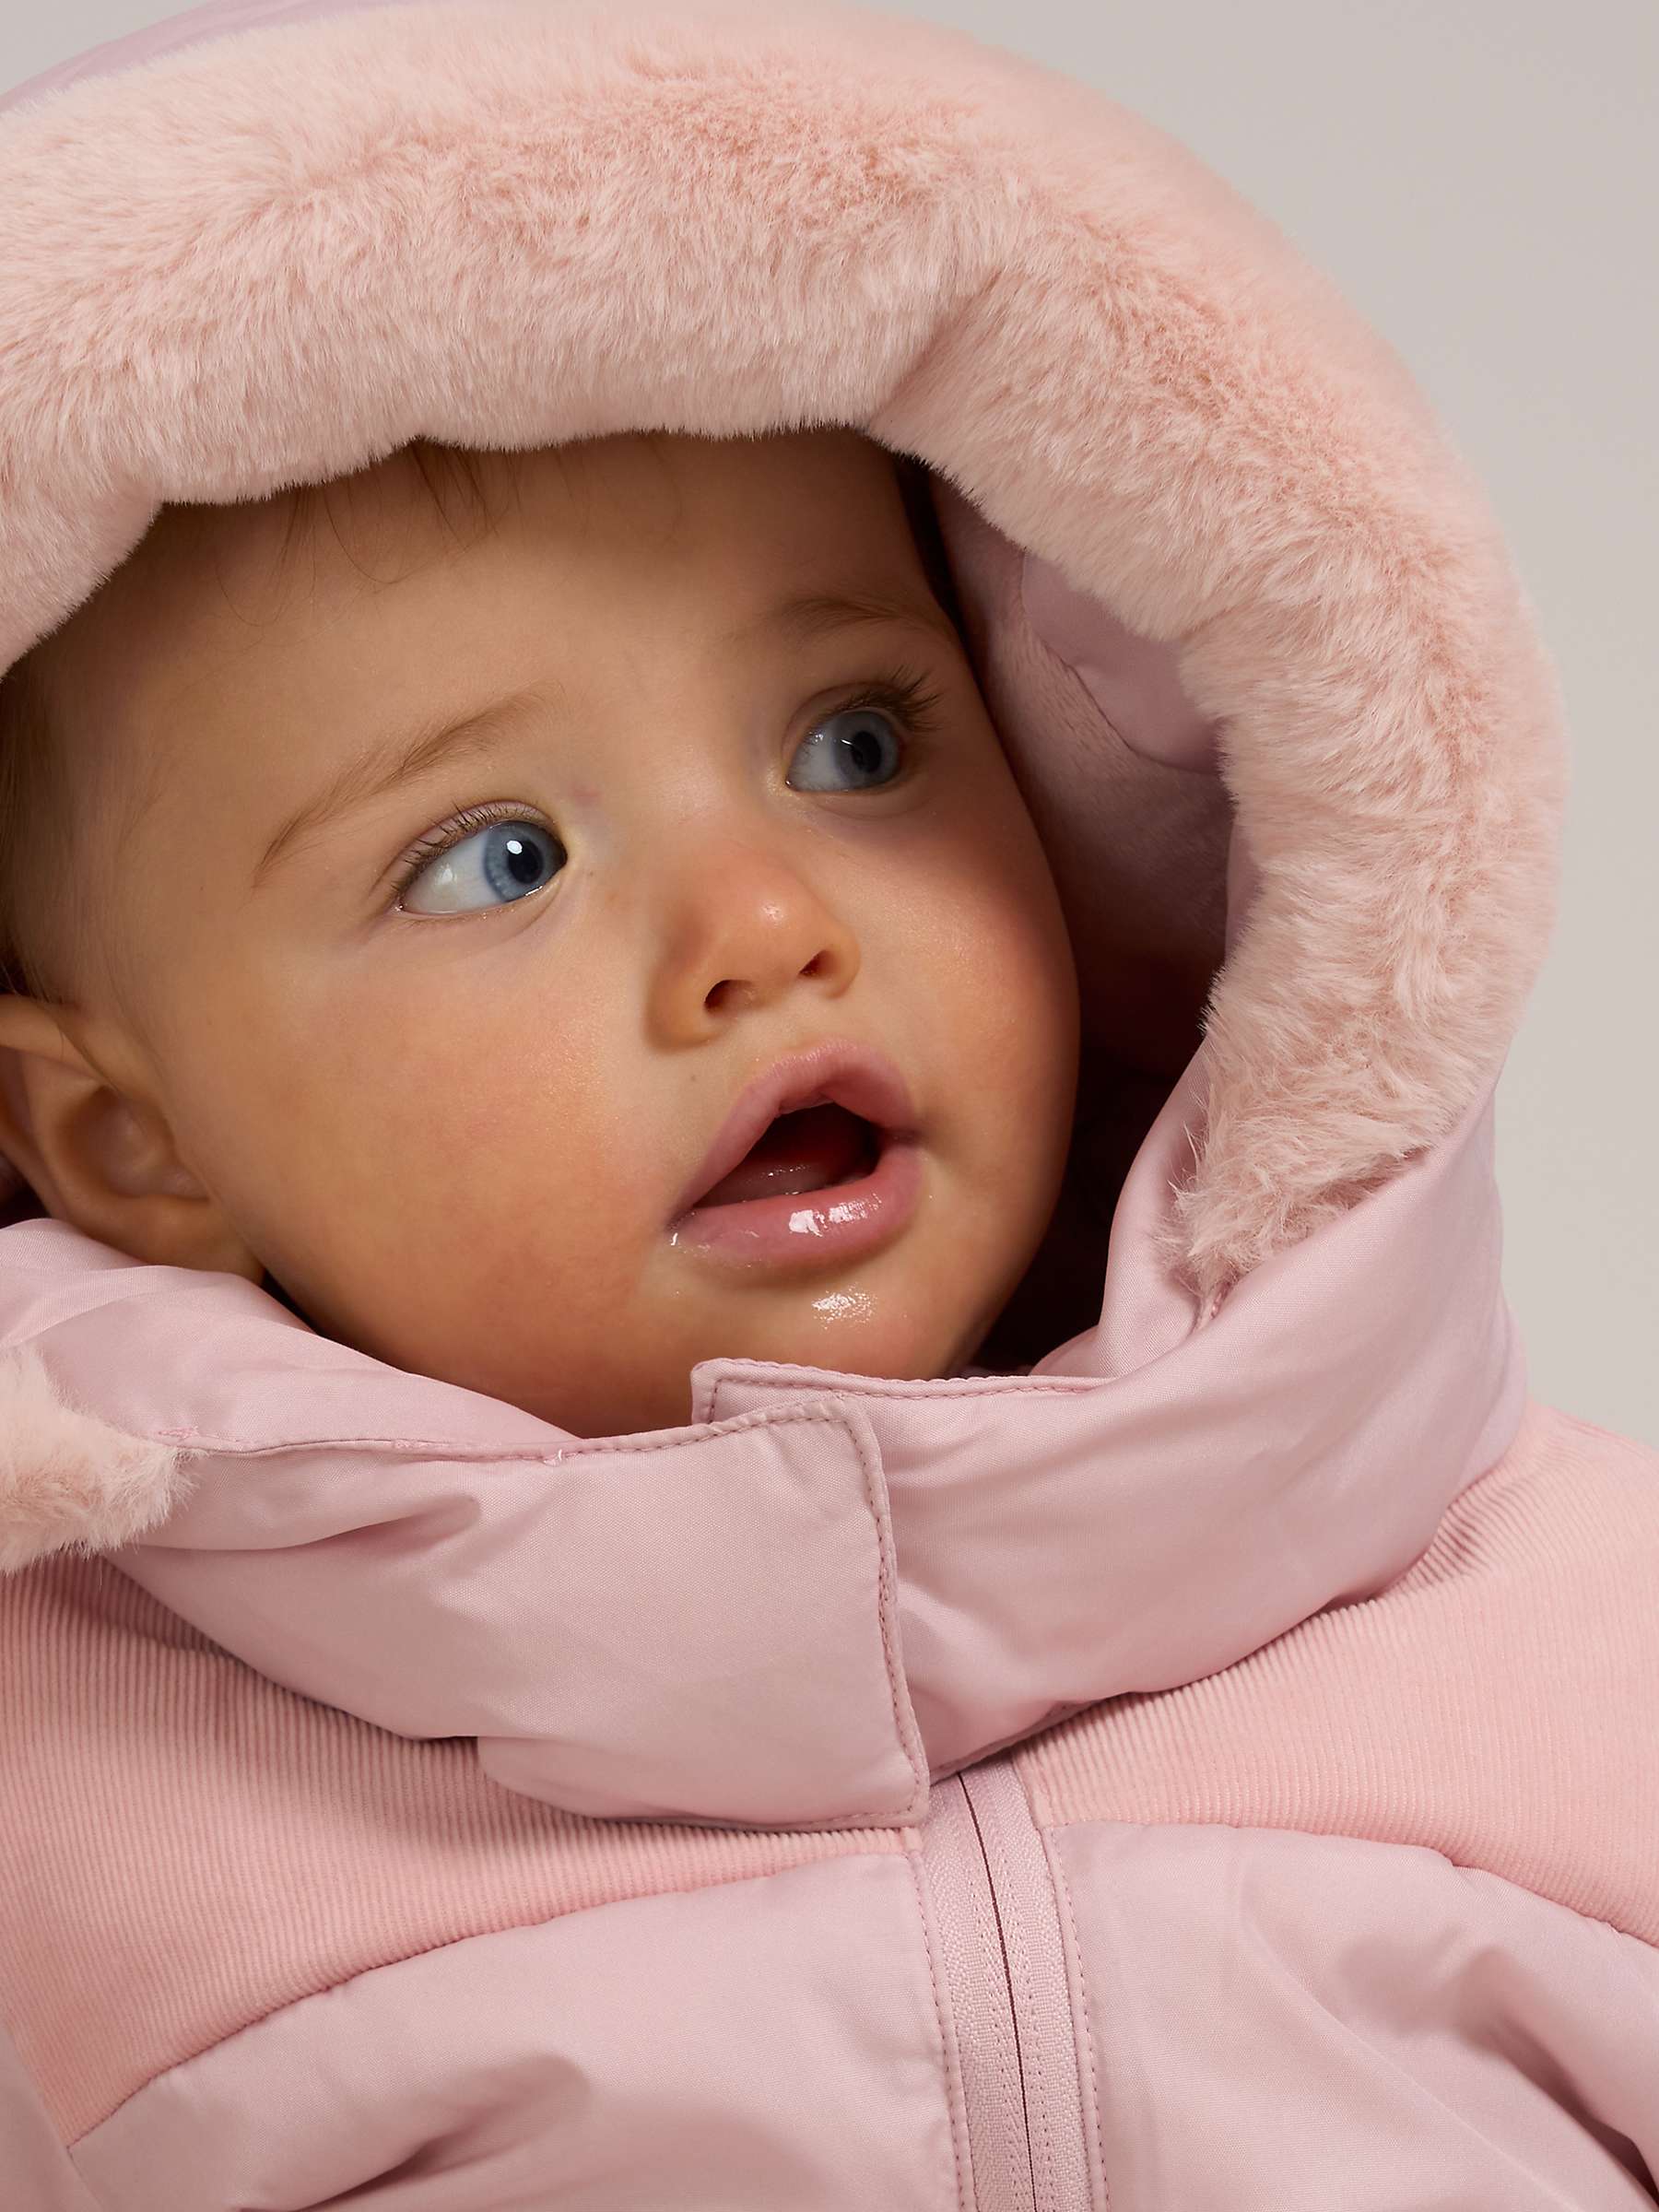 Buy Truly Baby Padded Coat Online at johnlewis.com